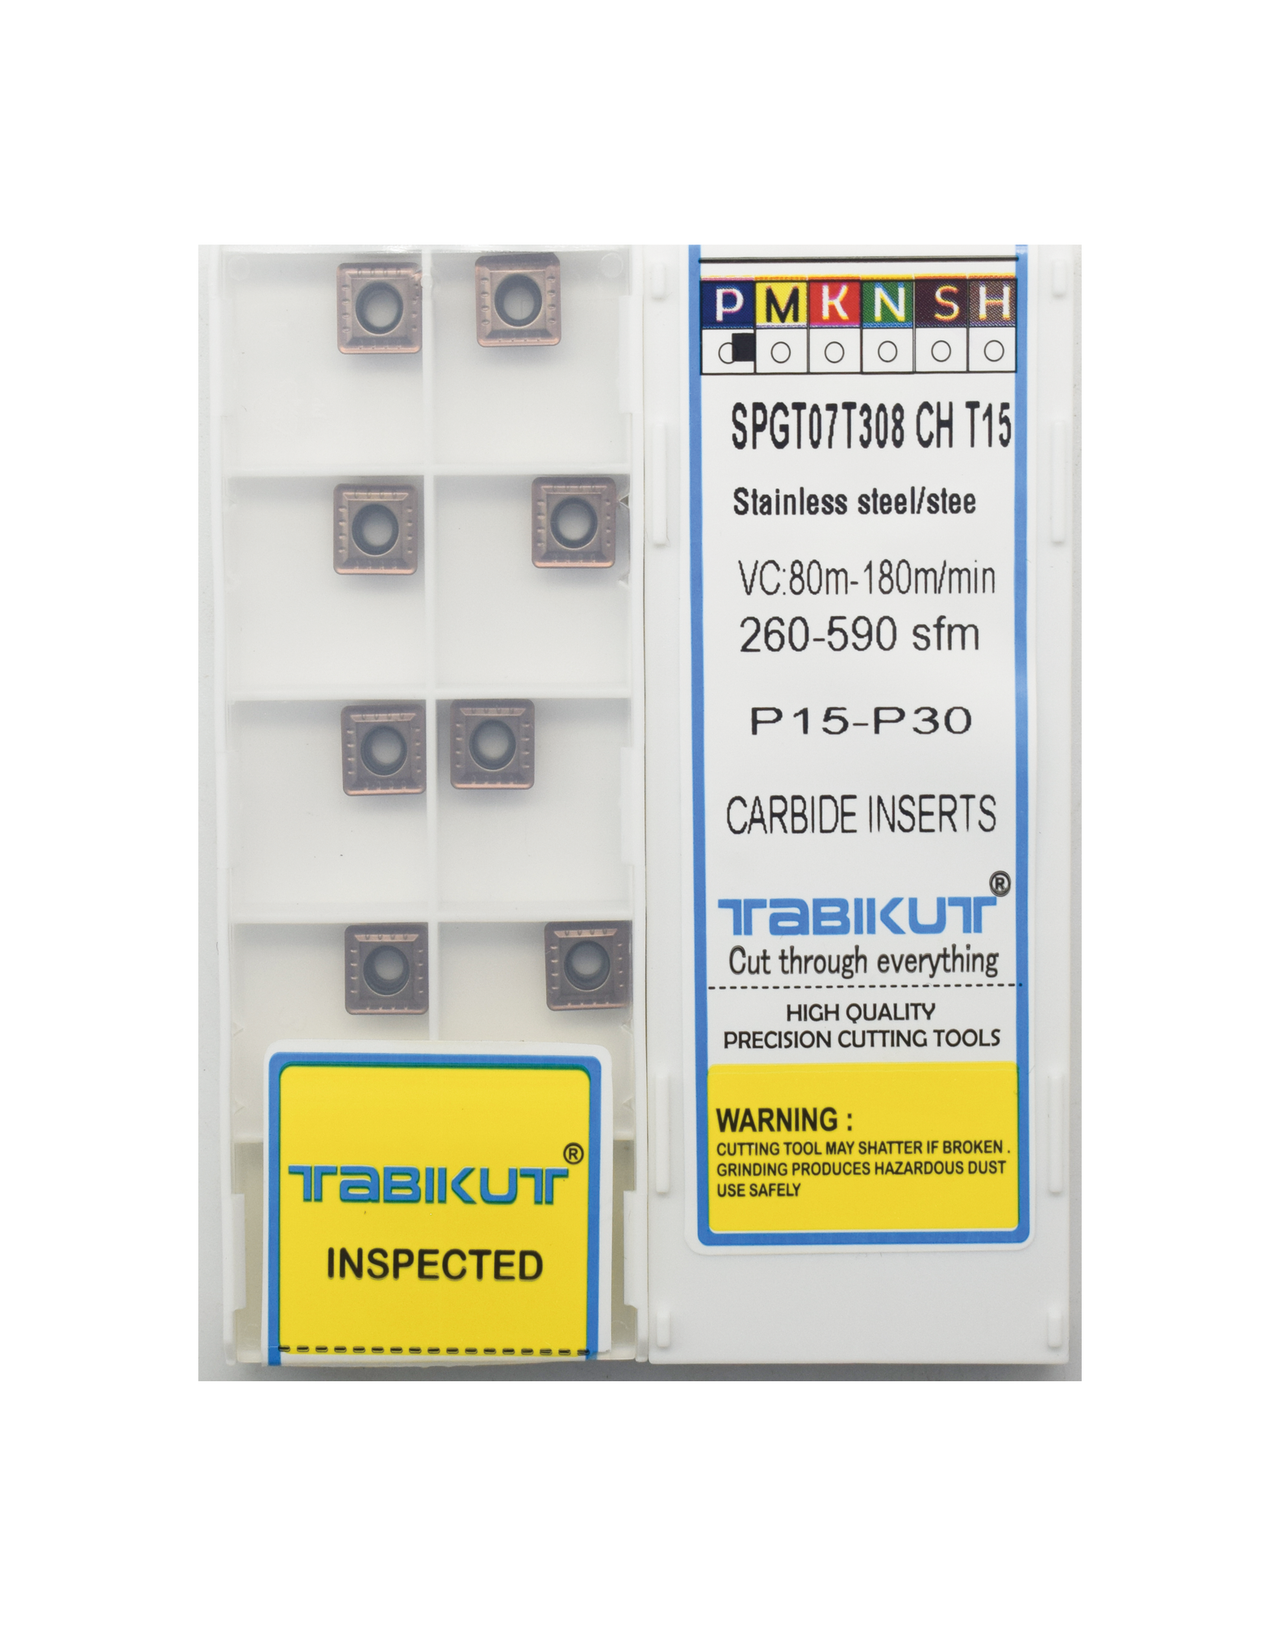 SPGT07T308 CH T15 drilling insert for ss and steel grade pack of 10